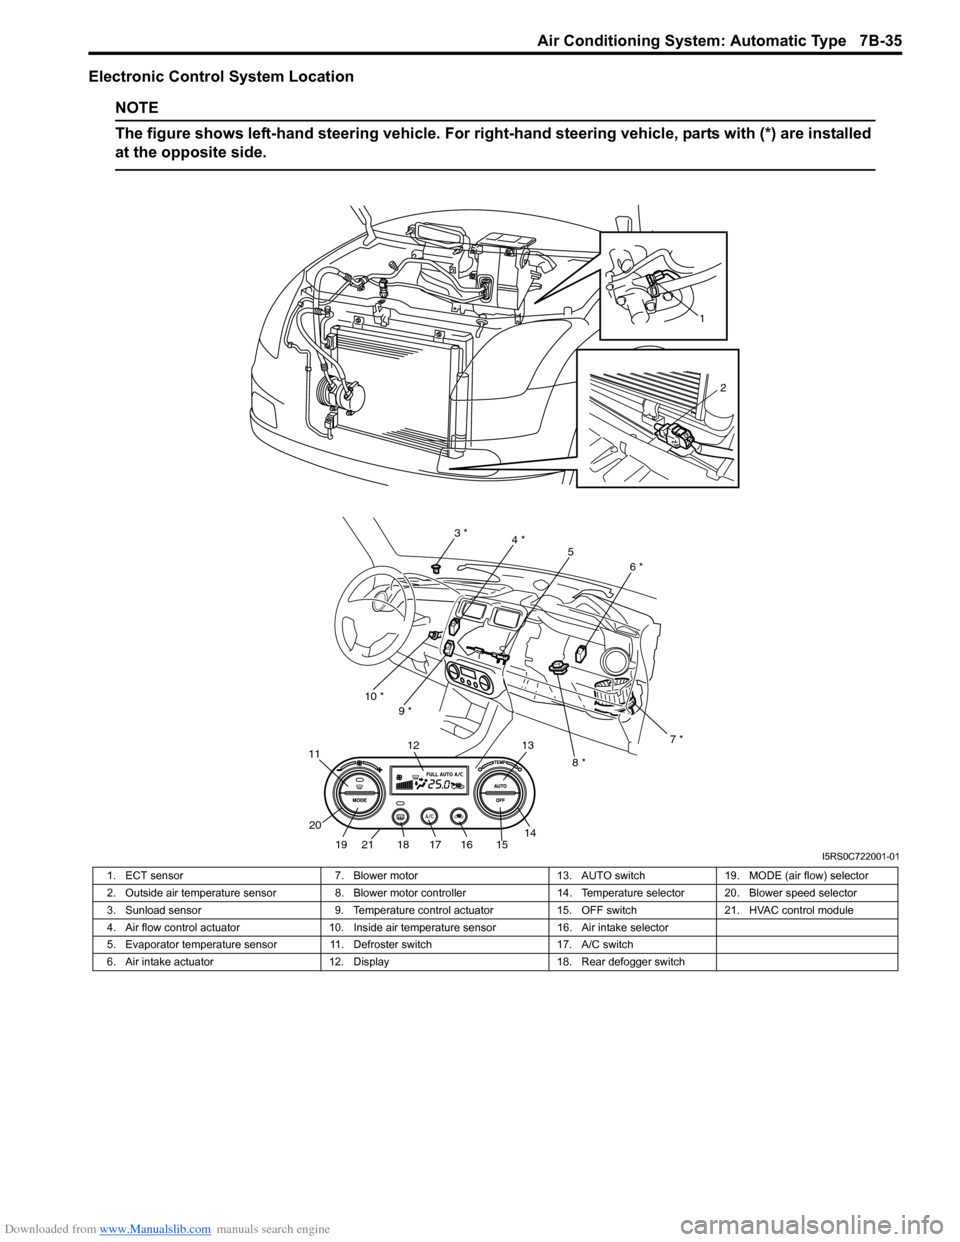 SUZUKI SWIFT 2006 2.G Service Owners Guide Downloaded from www.Manualslib.com manuals search engine Air Conditioning System: Automatic Type 7B-35
Electronic Control System Location
NOTE
The figure shows left-hand steering vehicle. For right-ha